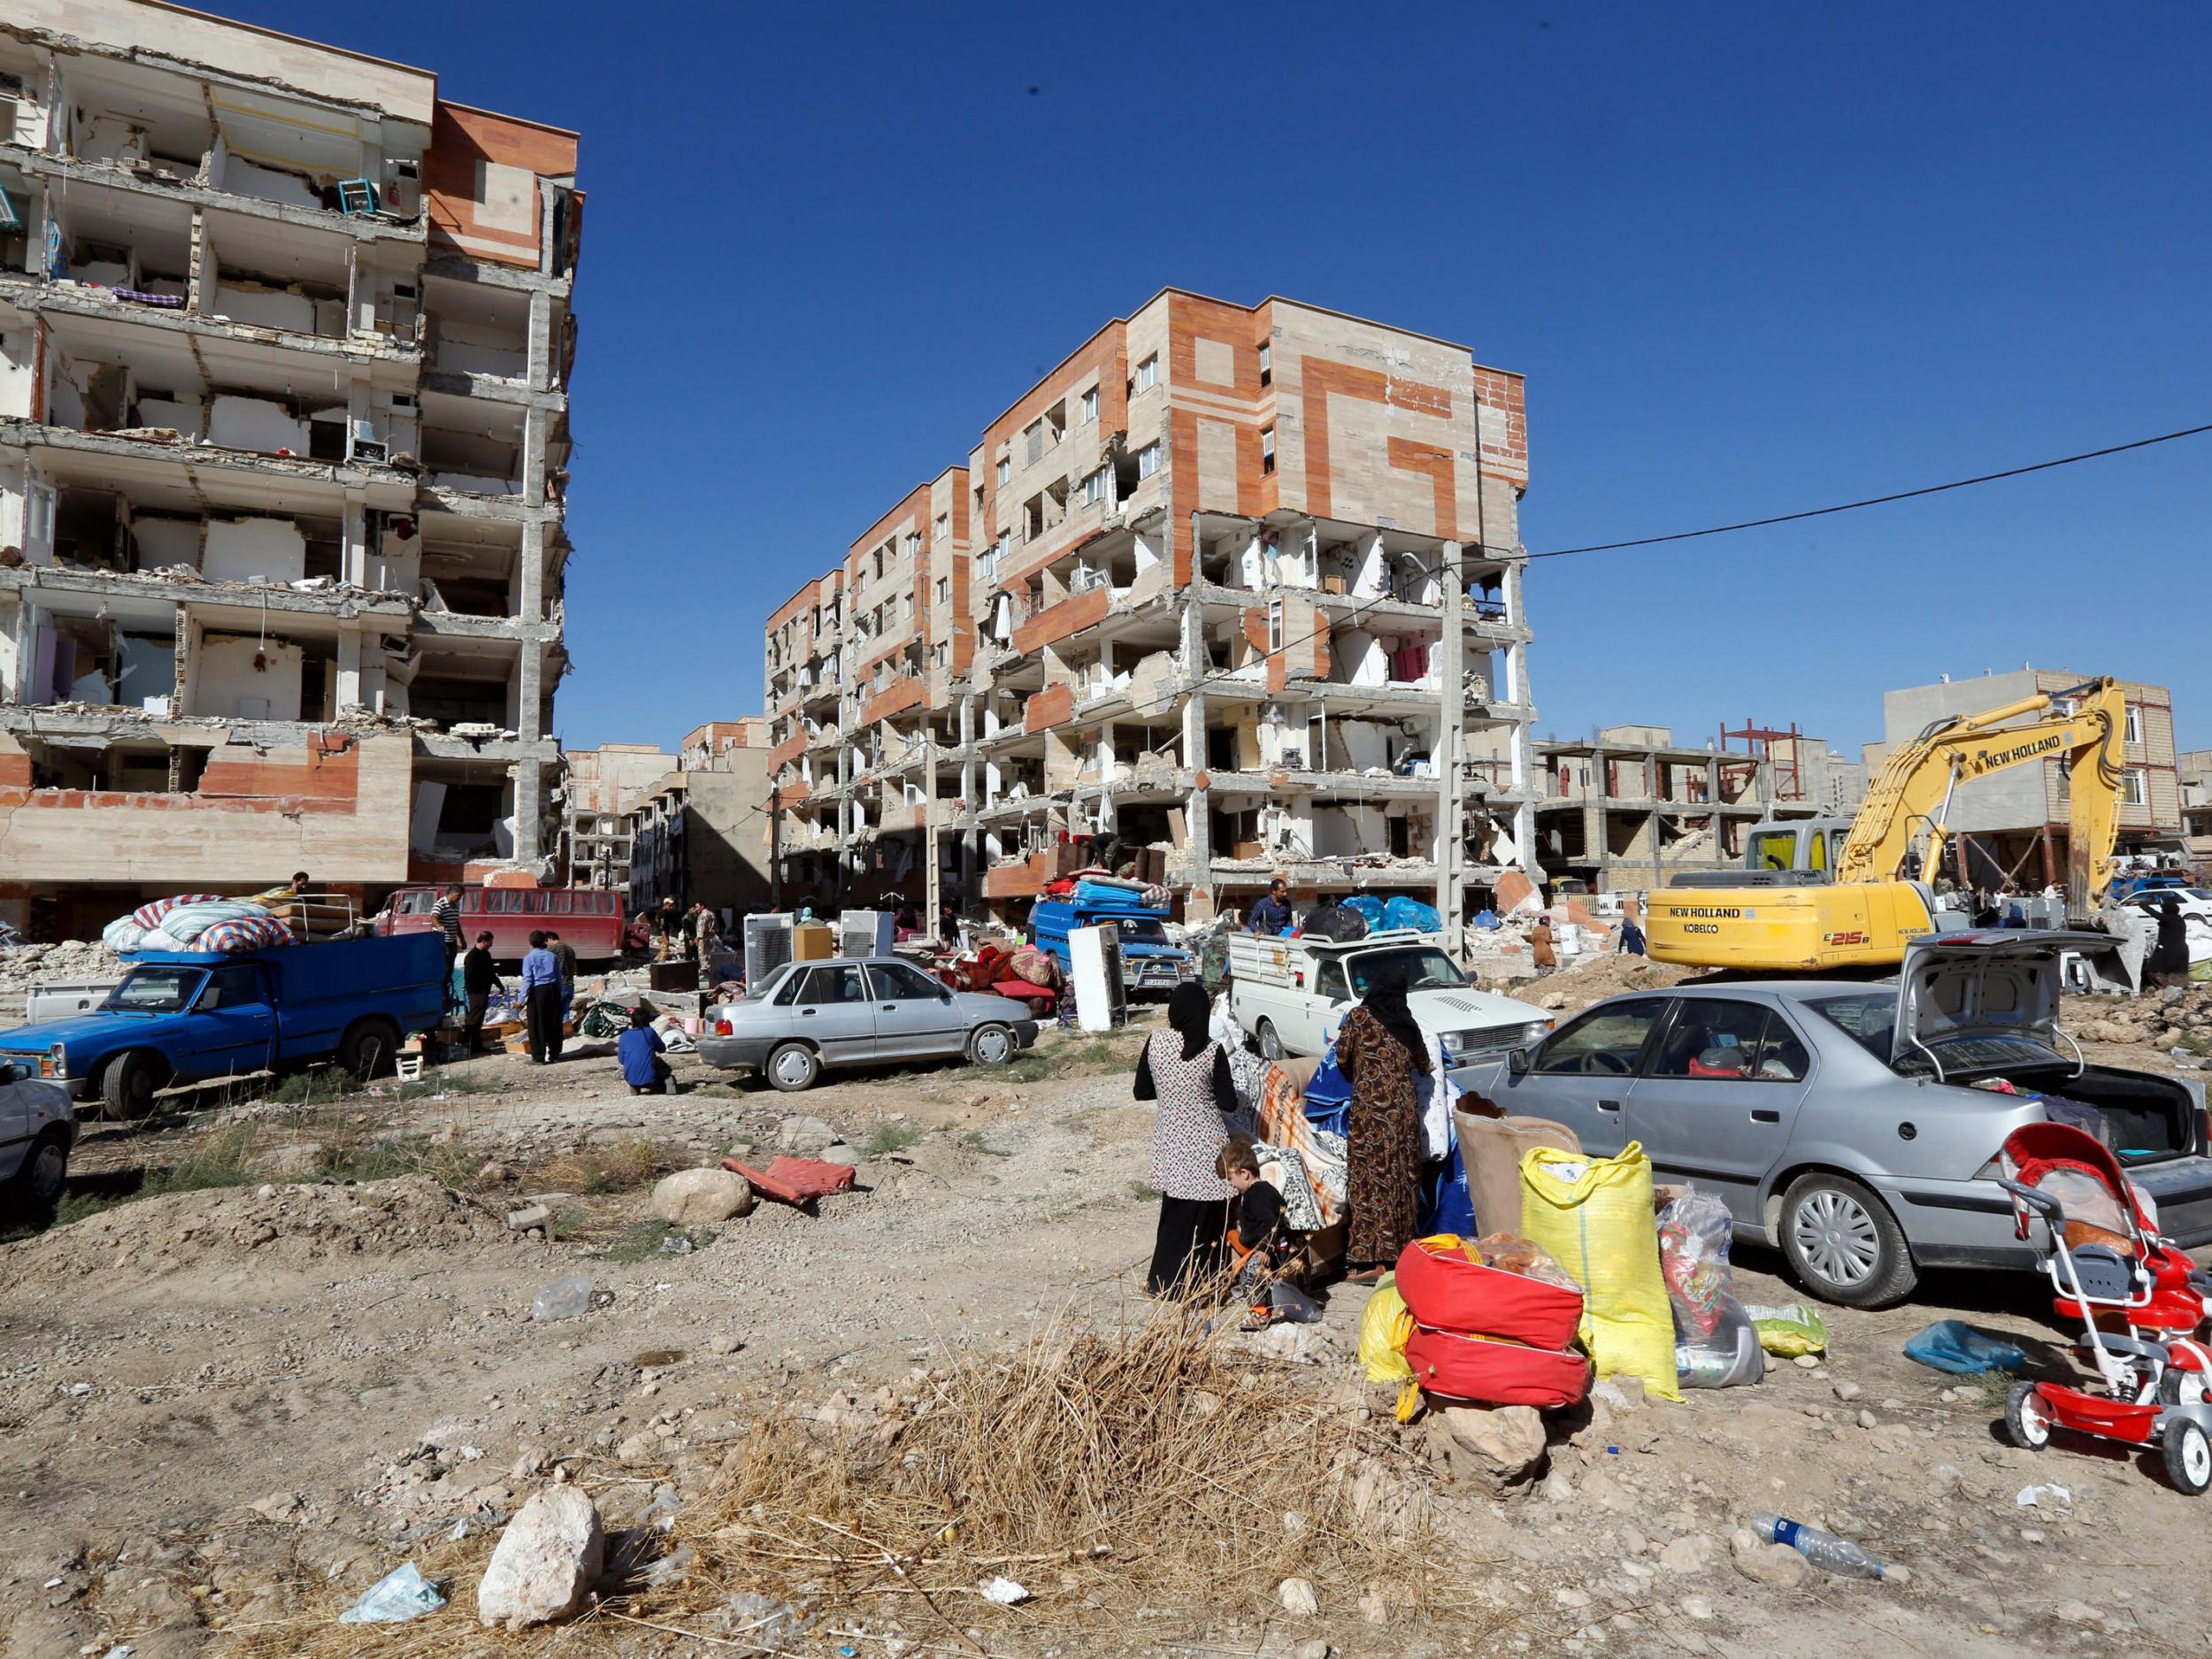 People collect belongings from damaged buildings in the city of Sarpol-e-Zahab in Kermanshah province